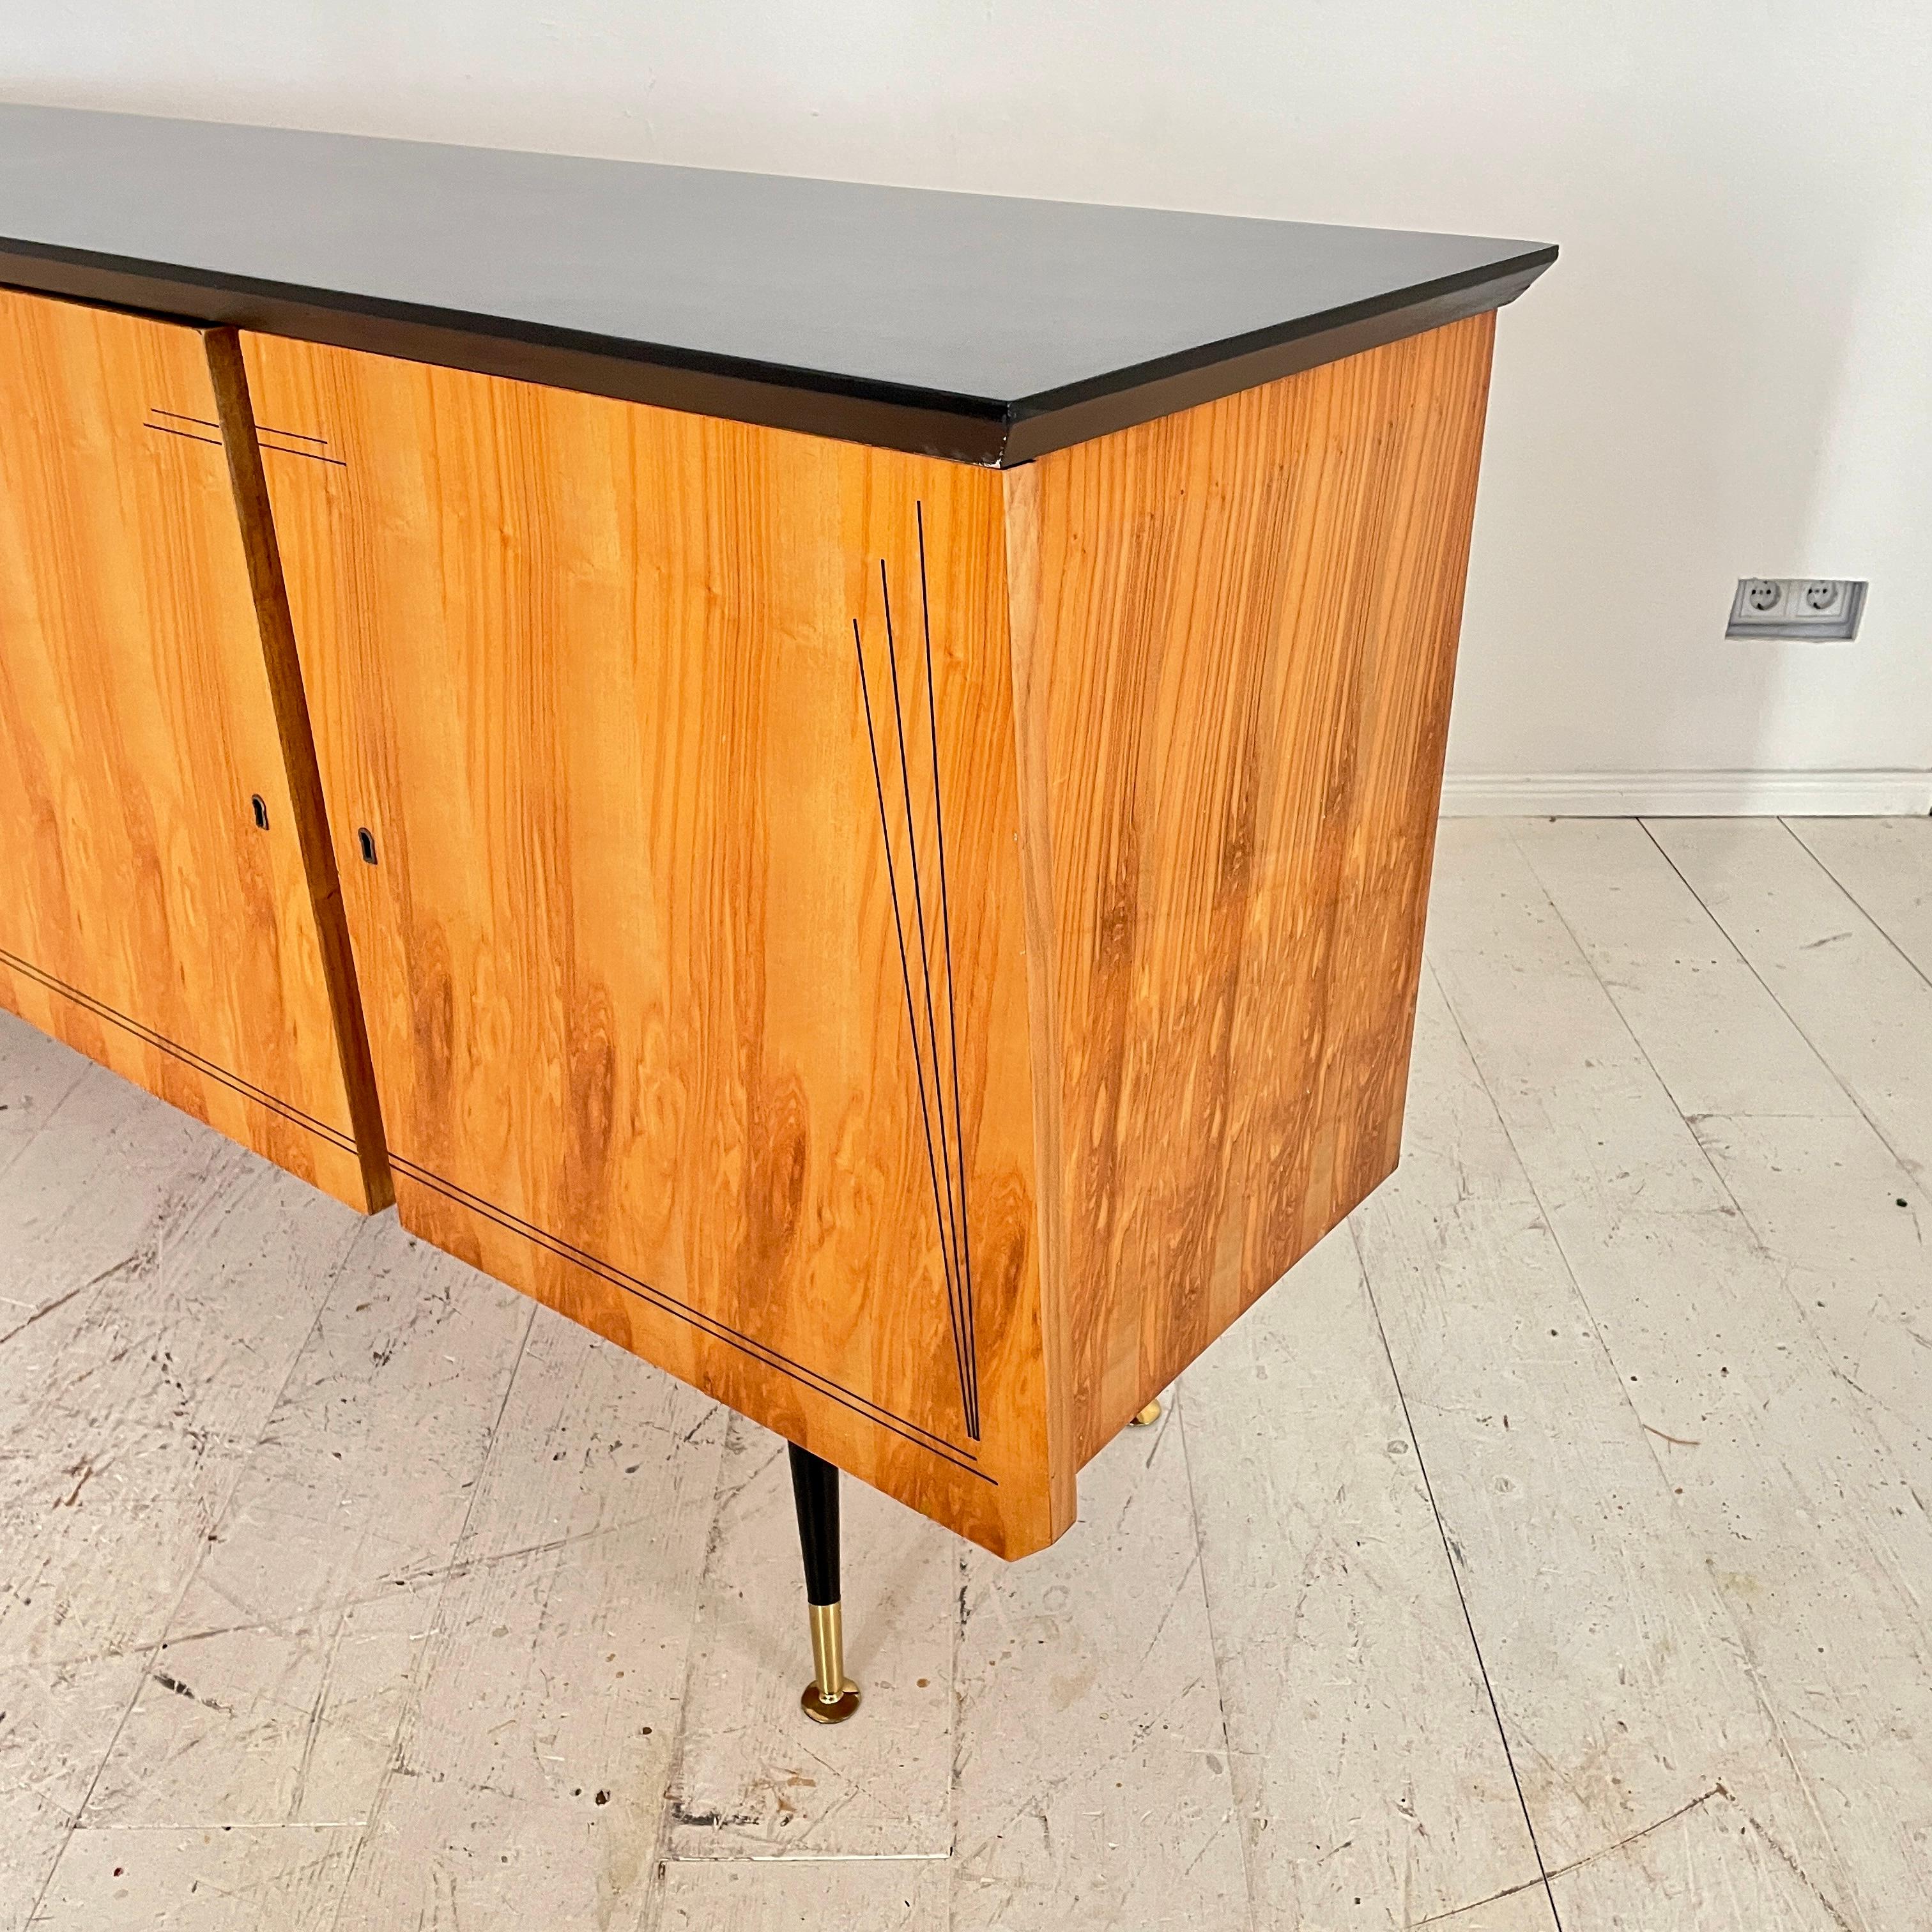 Italian Midcentury Sideboard with 4 Doors in Ash, Black and Brass, Around 1950 For Sale 4